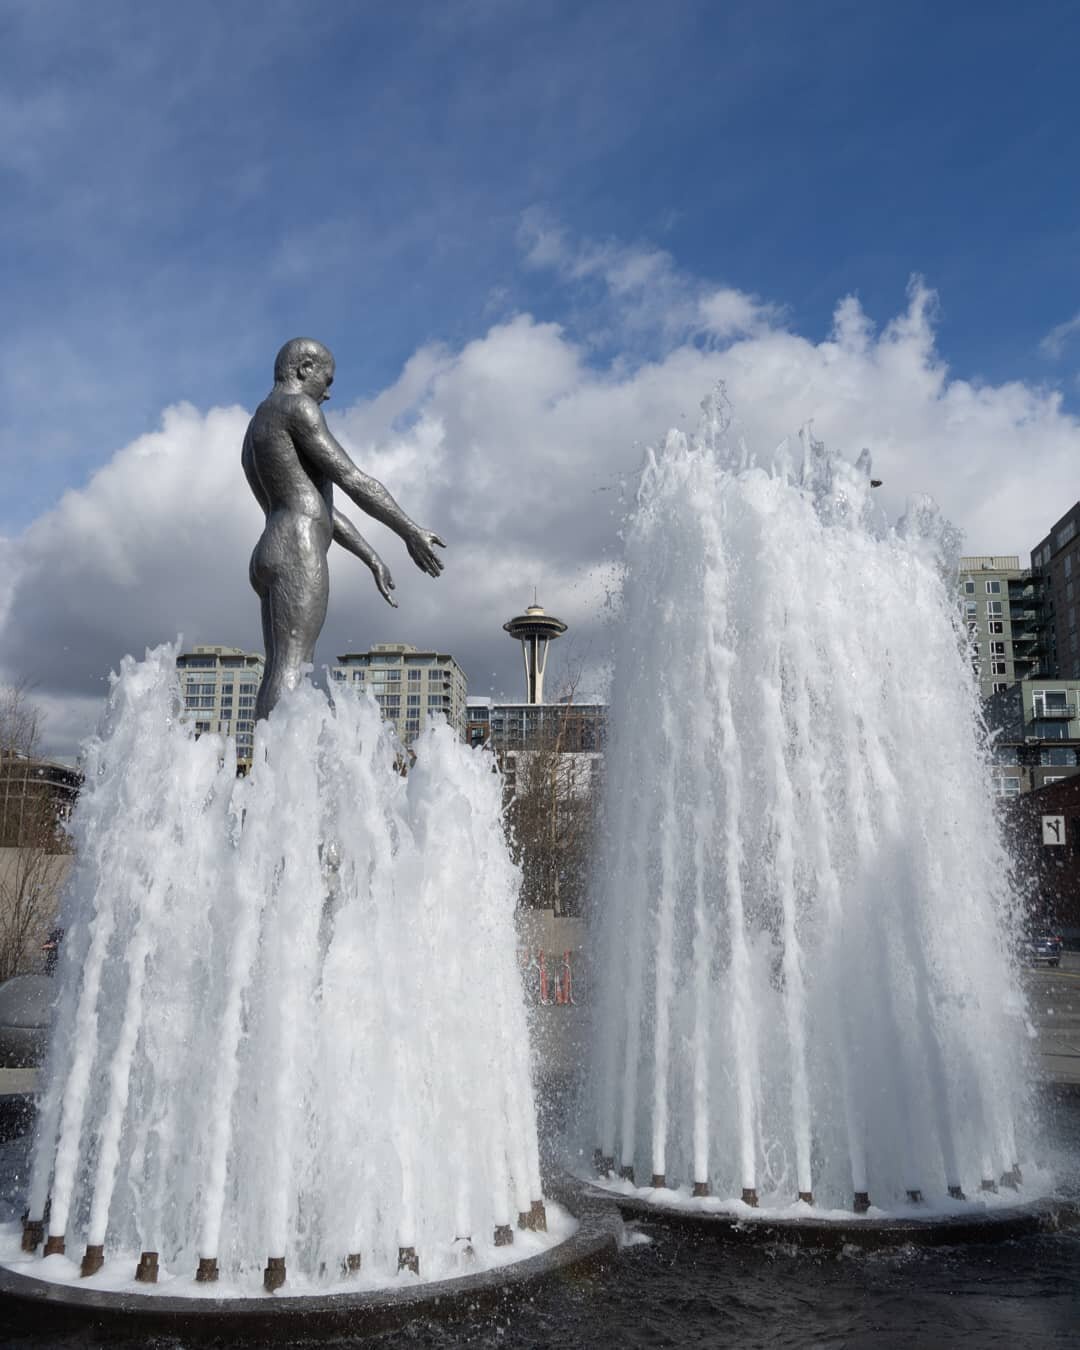 Art meets architecture 🗼 This sculpture fountain shows either adult or kid and from this perspective they are praising the space needle ⛲ For more pictures off Seattle, have a look at my latest blog, link in my bio 😊
.
.
.
#wanderlust #travelblog #